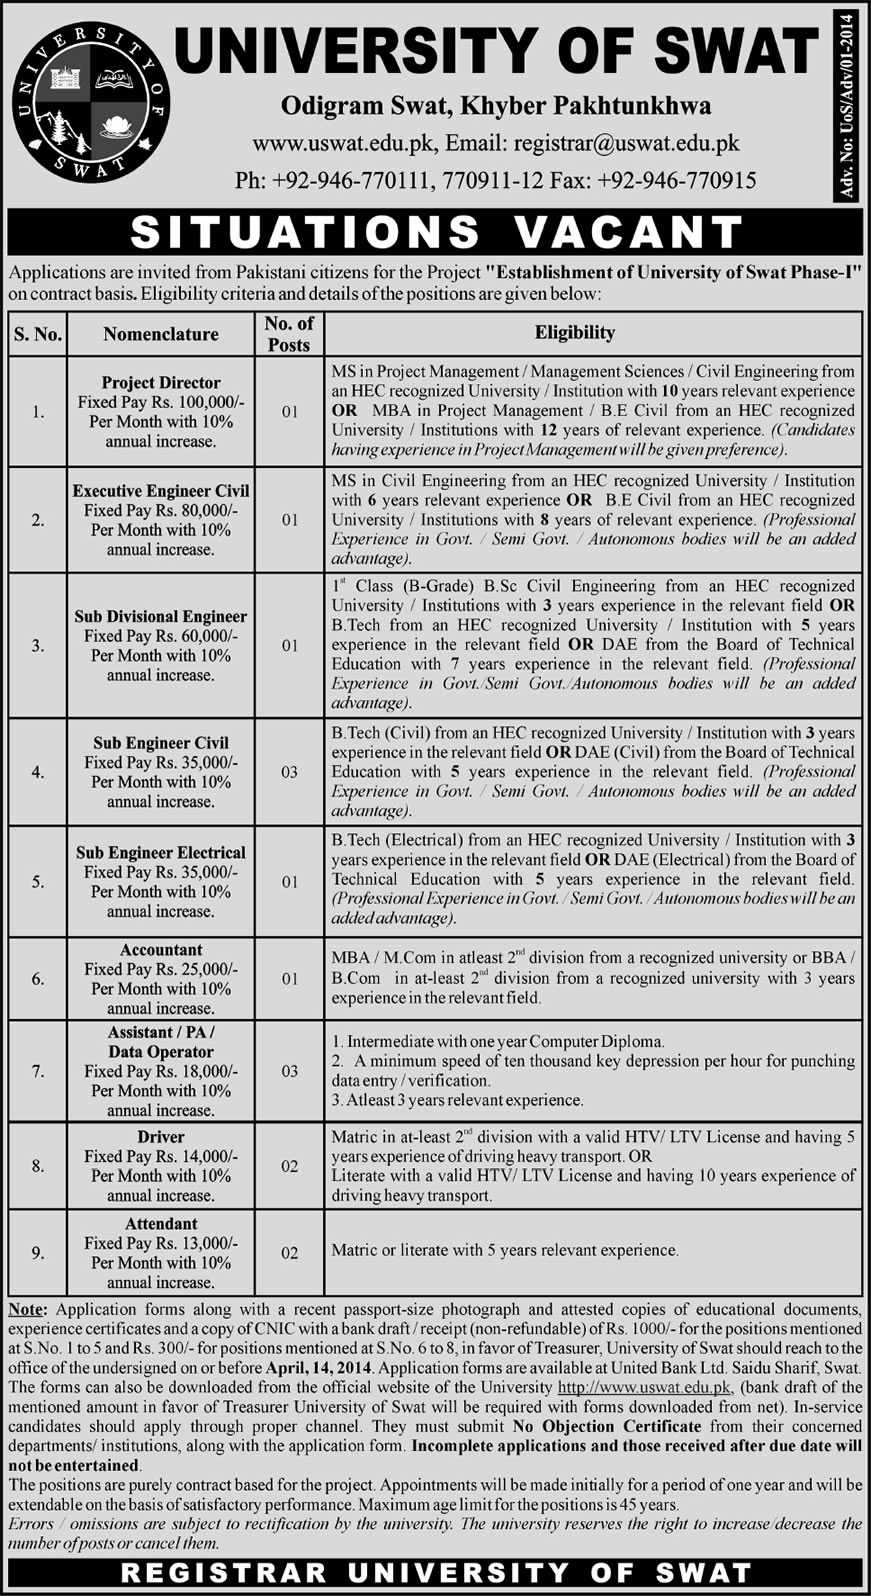 University of Swat Jobs 2014 April for Civil / Electrical Engineers, Accountant, Assistant, Driver & Attendant